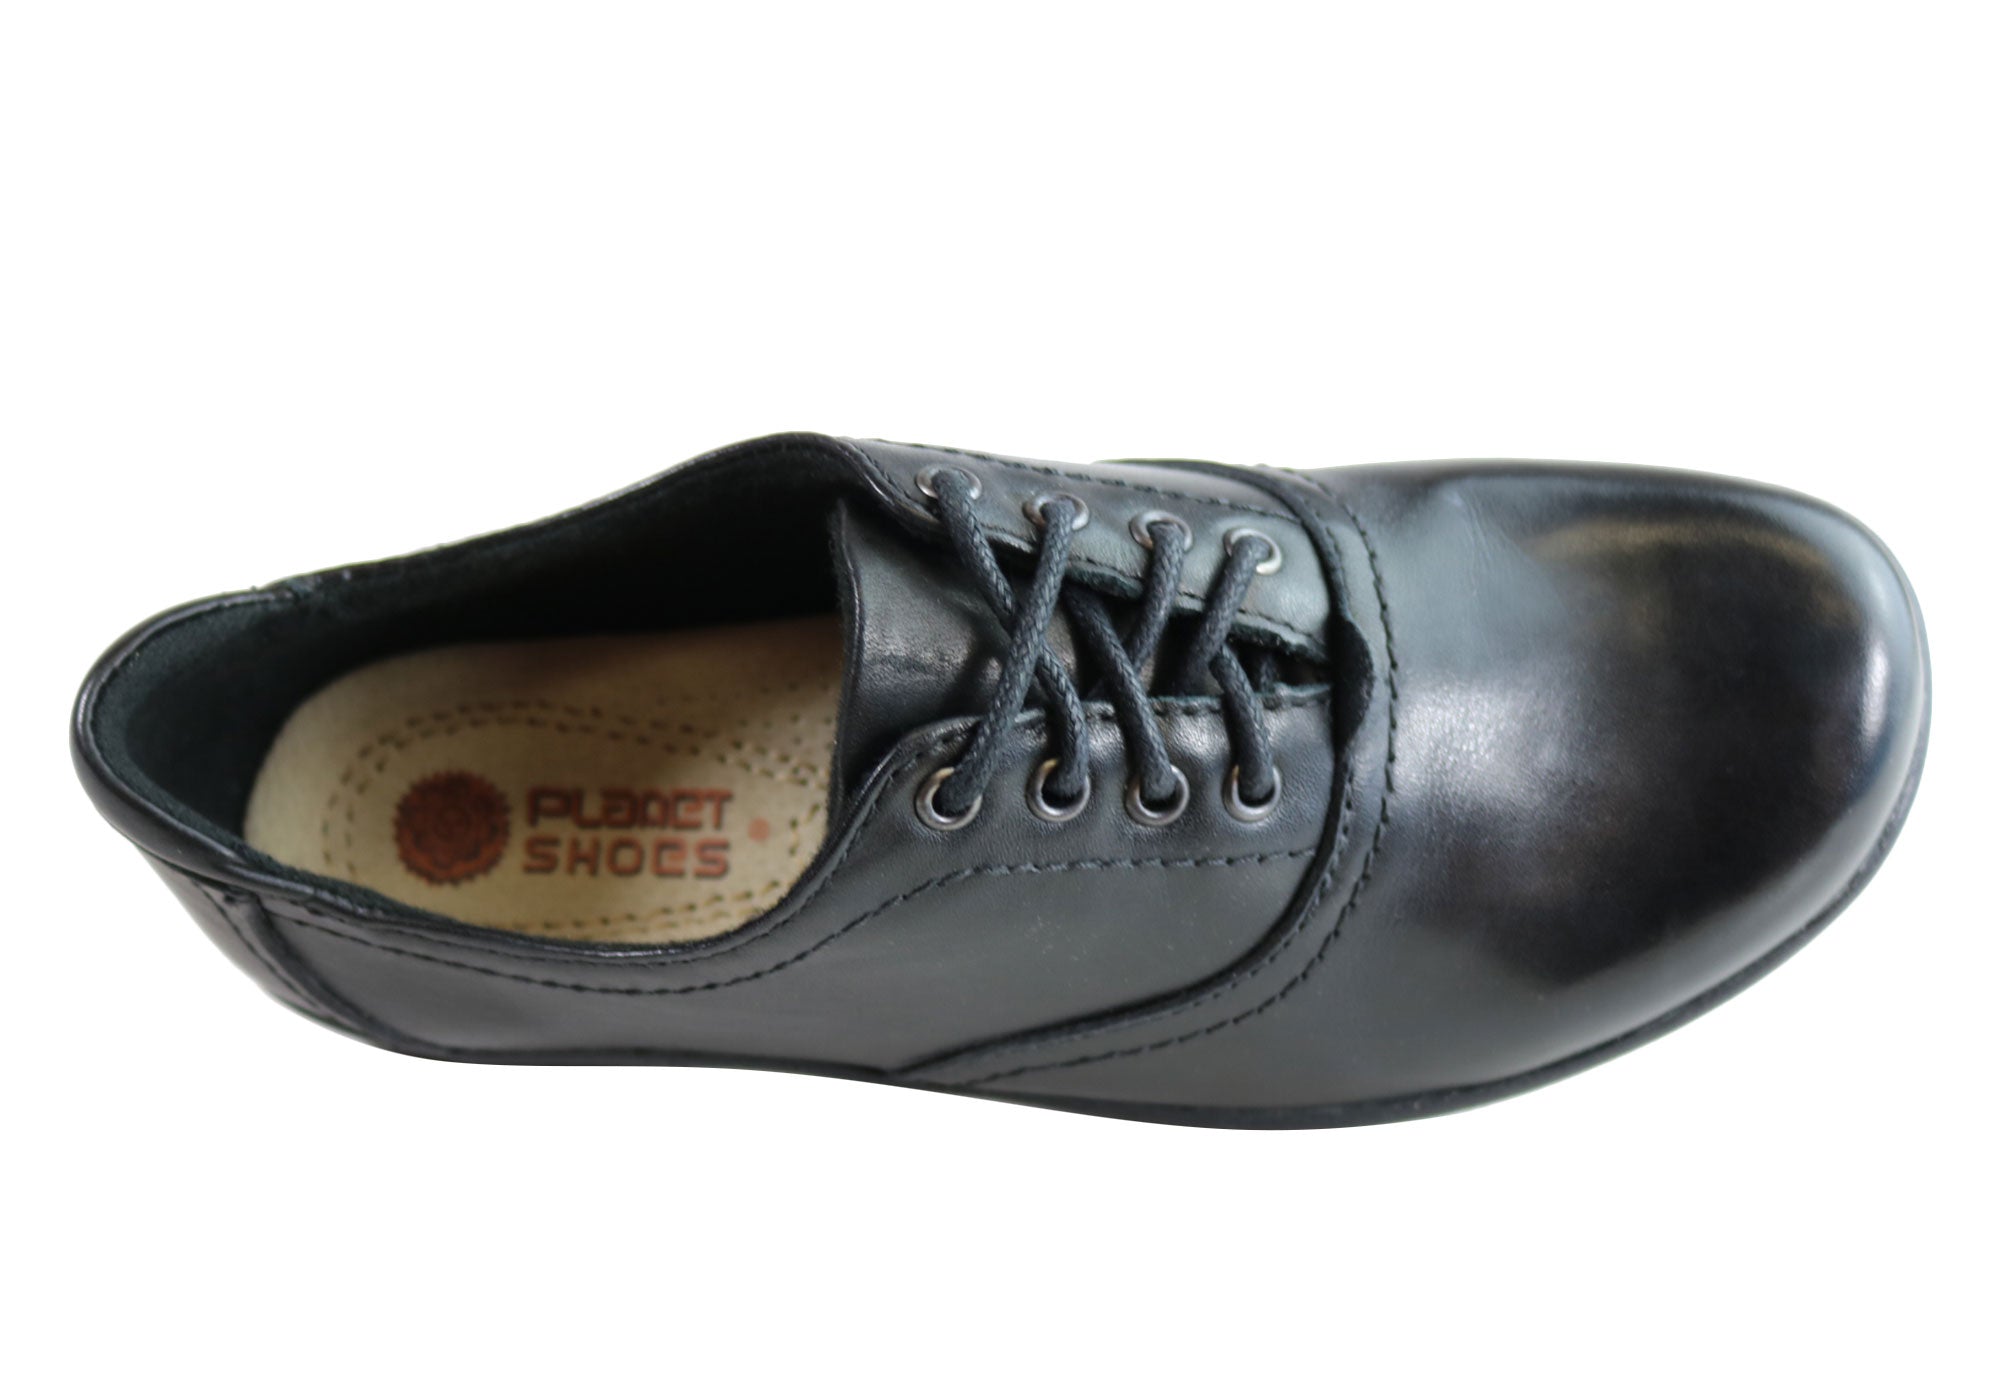 black dress shoes with arch support